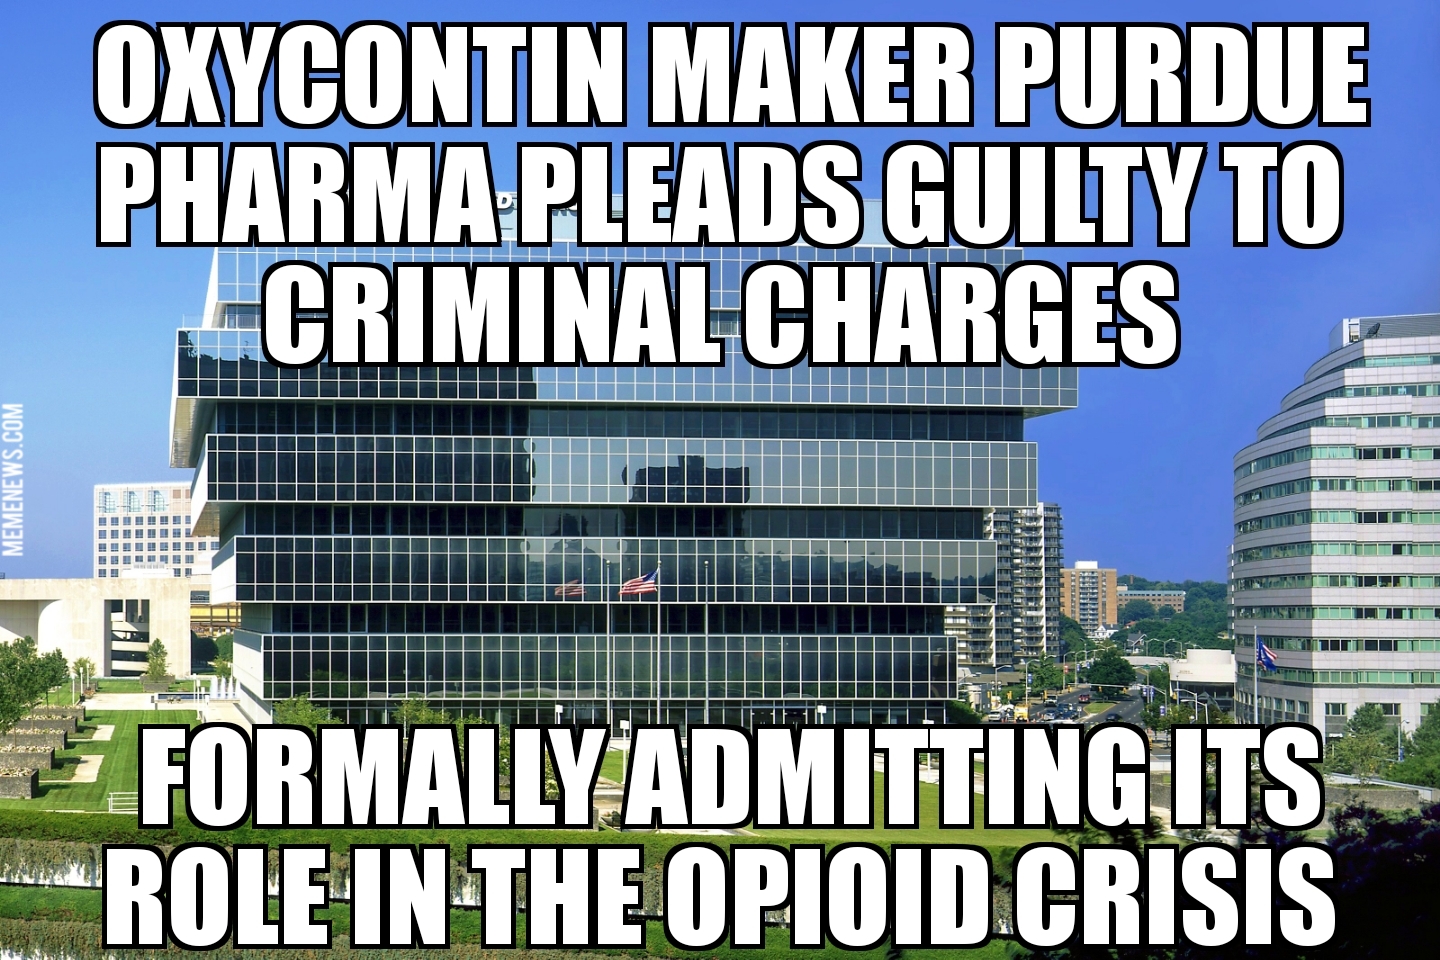 Purdue Pharma pleads guilty to criminal charges